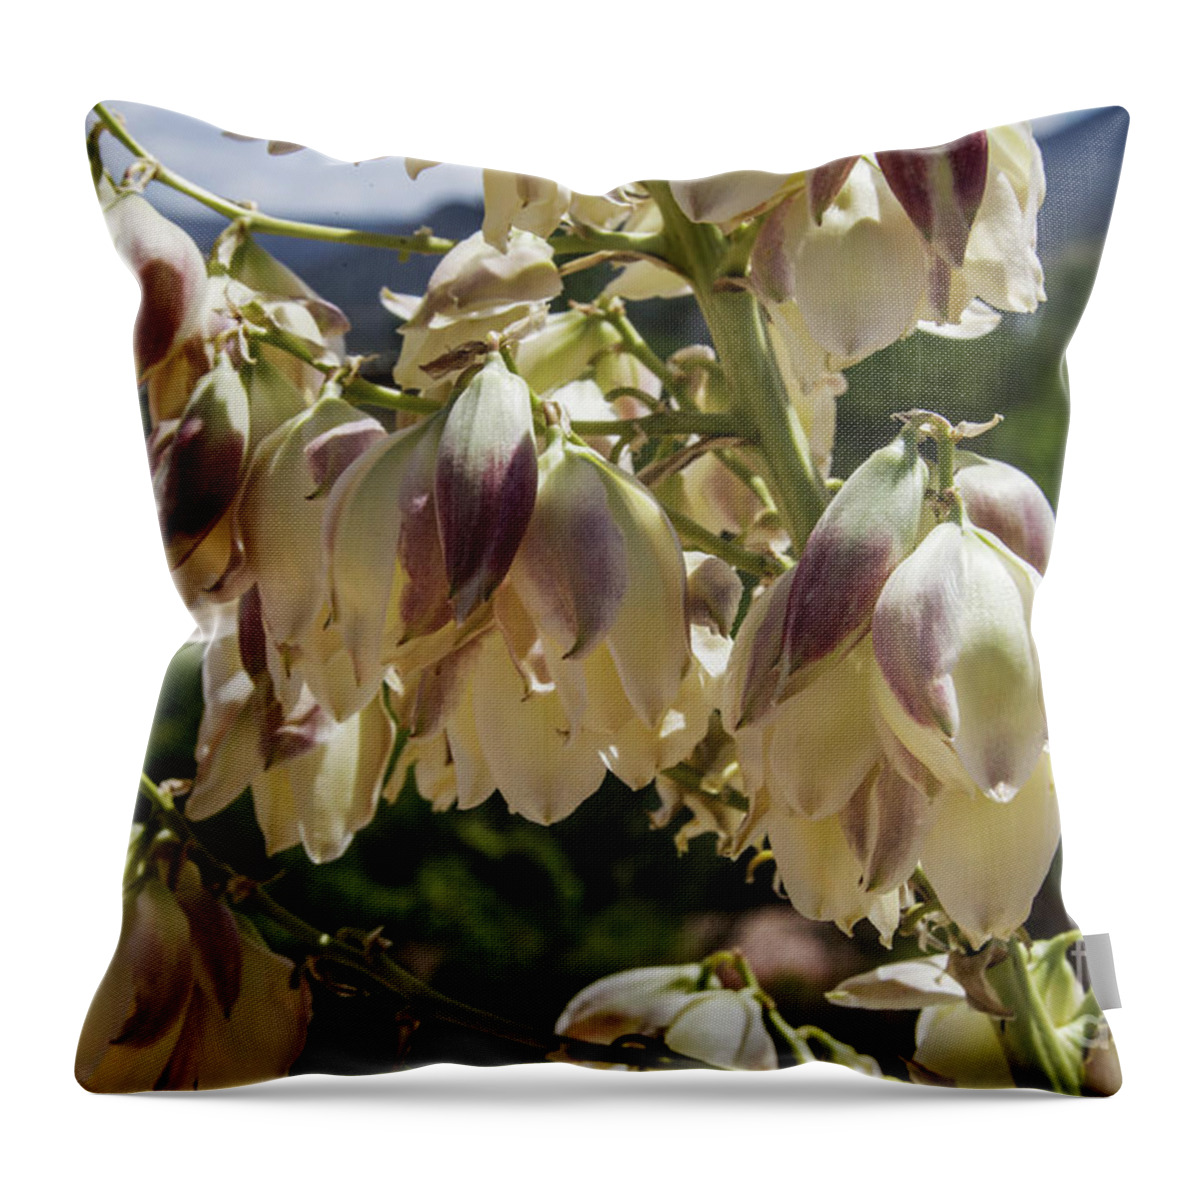 Flowers; Wildflowers; Desert; Plants; Southwest Throw Pillow featuring the photograph Yucca, New Blooms by Kathy McClure